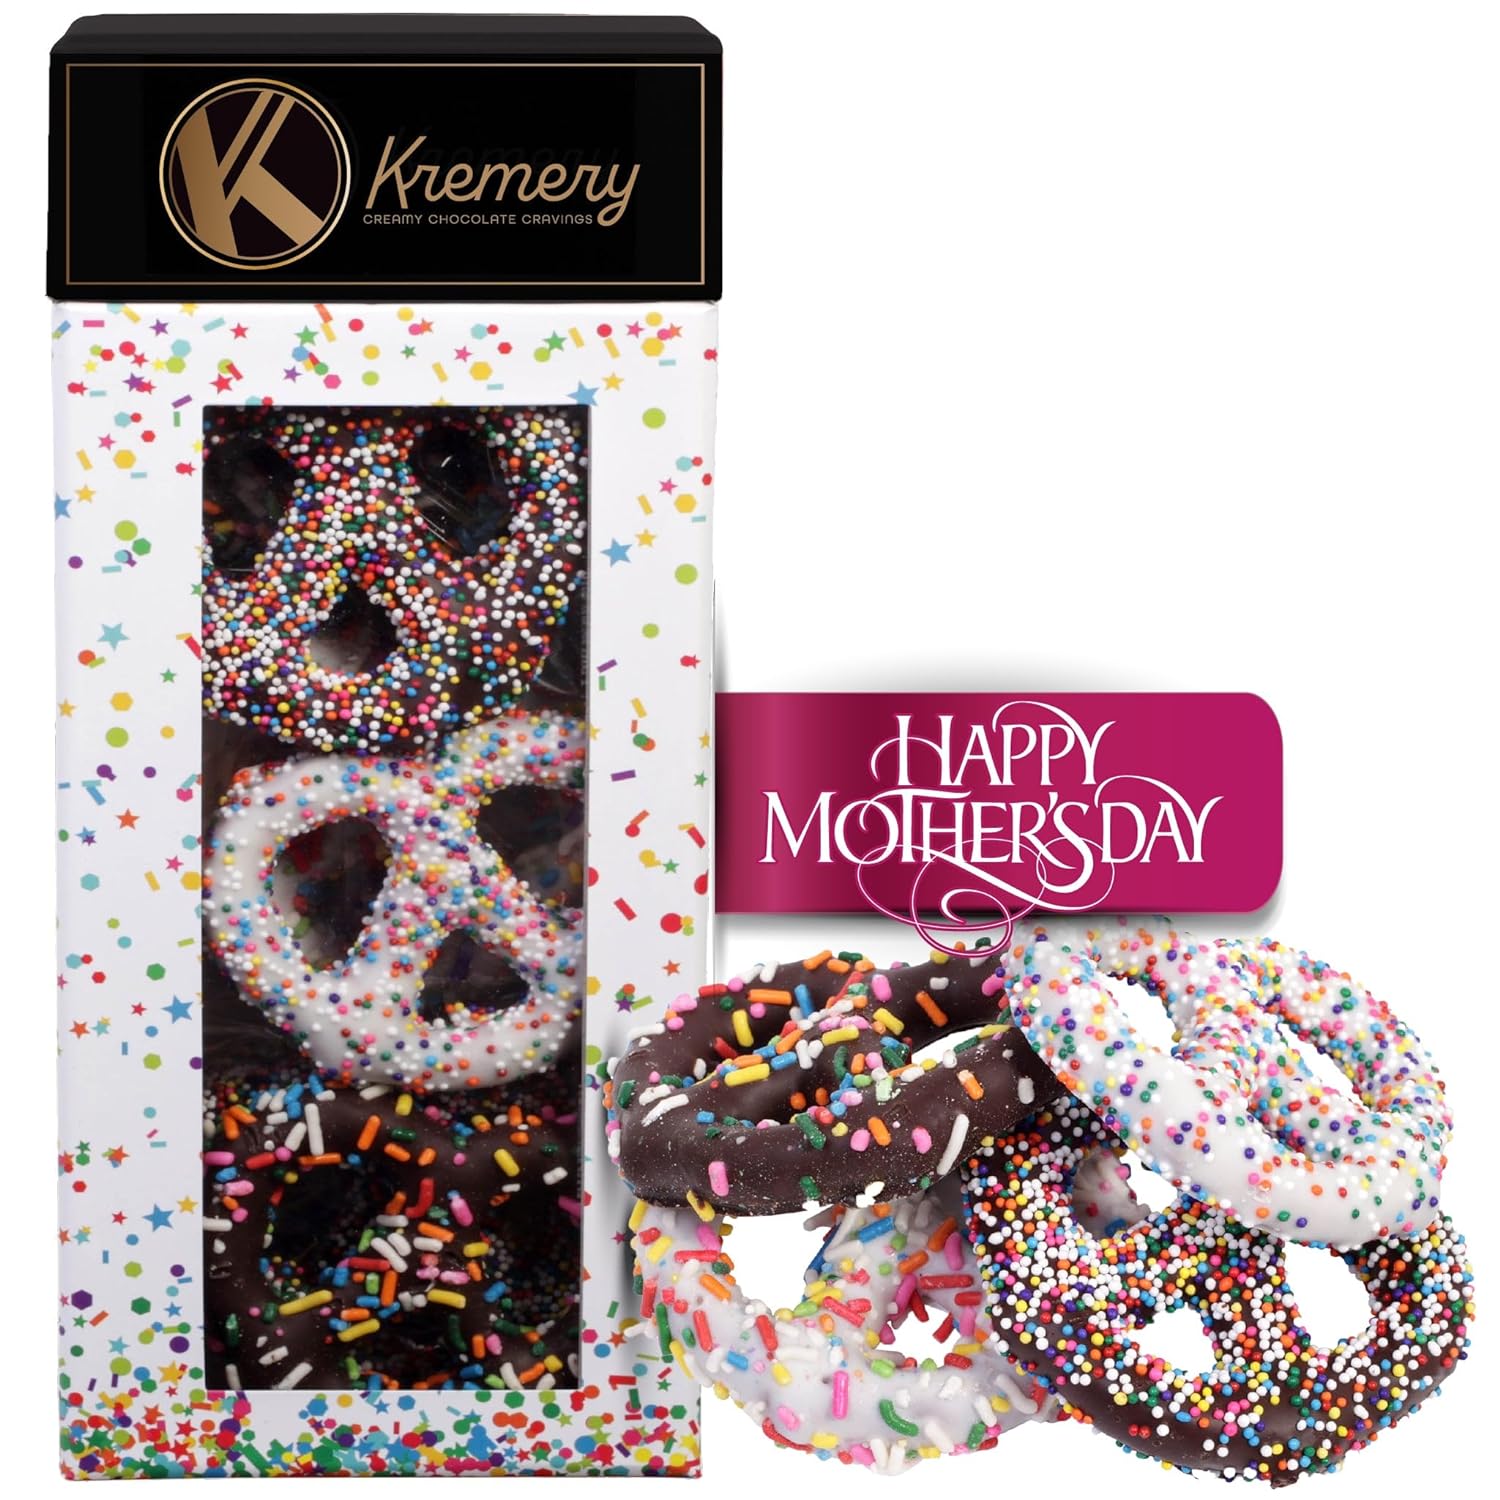 KREMERY Creamy Chocolate Cravings - Mothers Day Chocolate Covered Pretzel Twists Gift Basket in Confetti Tower, Assorted Candy Toppings (12 Count) Birthday Care Package - Kosher Dairy USA Made